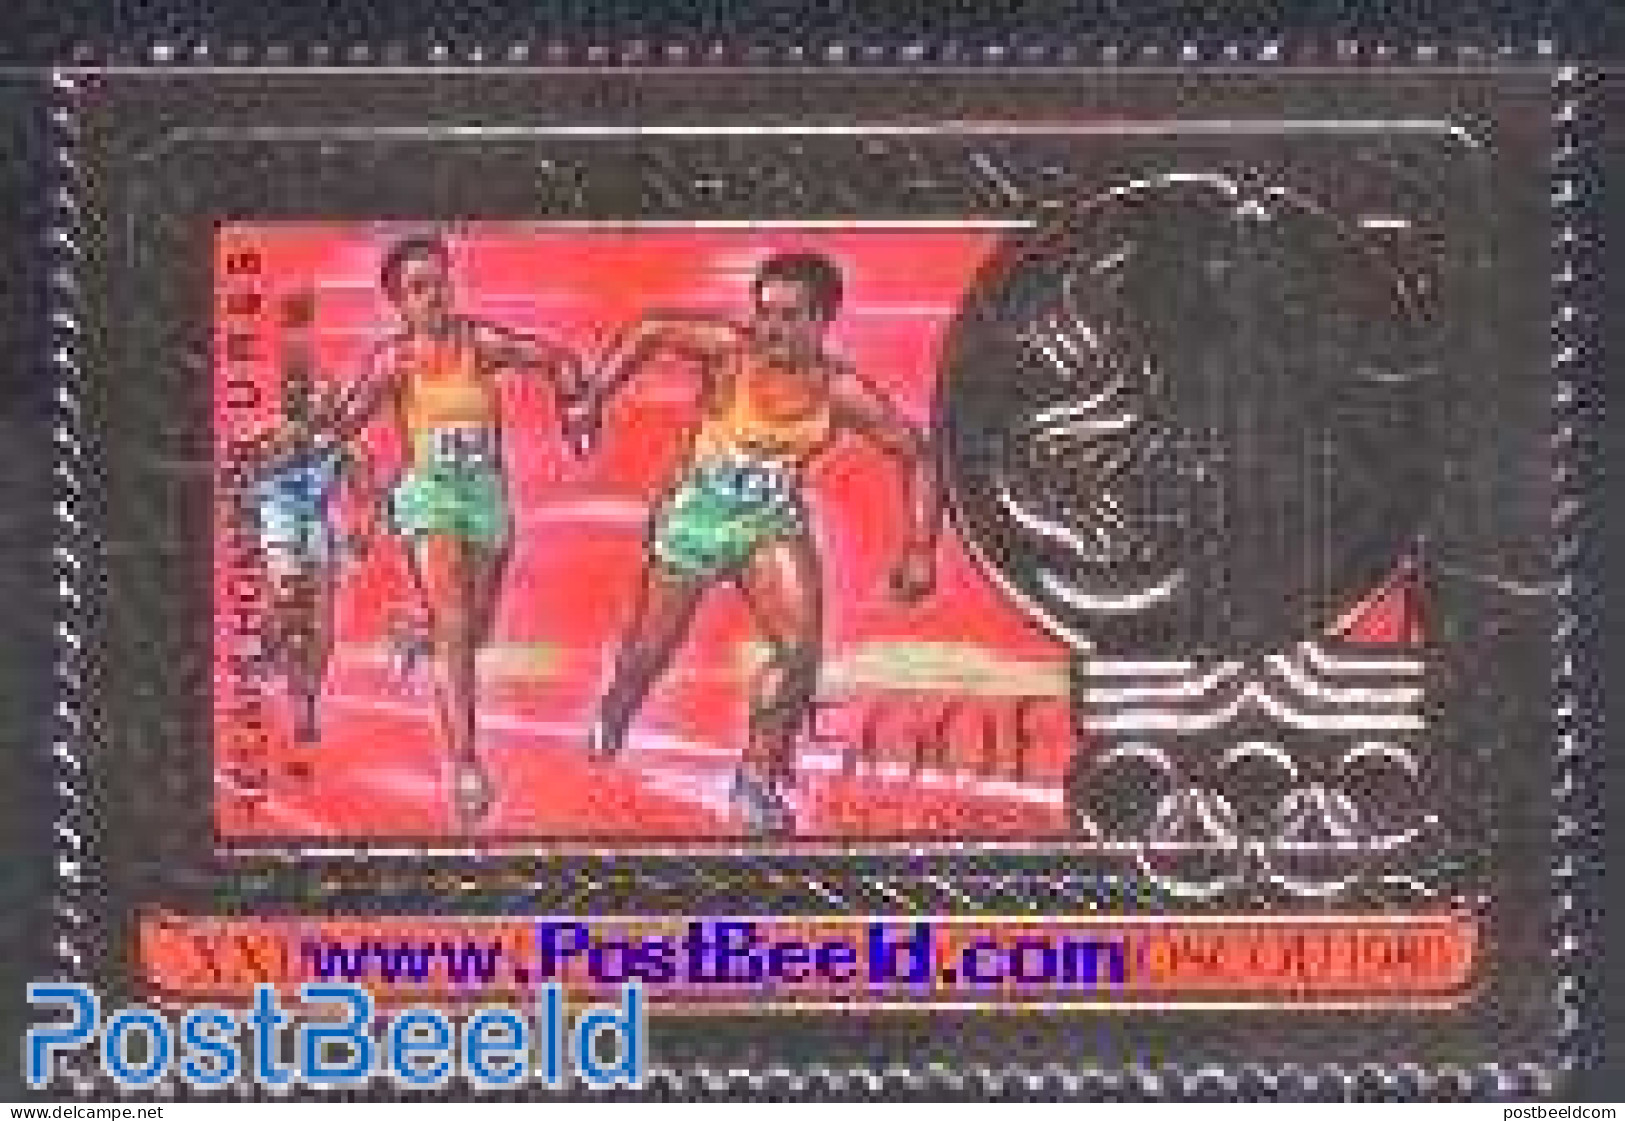 Central Africa 1981 Olympic Winners 1v, Gold, Mint NH, Sport - Athletics - Olympic Games - Athlétisme